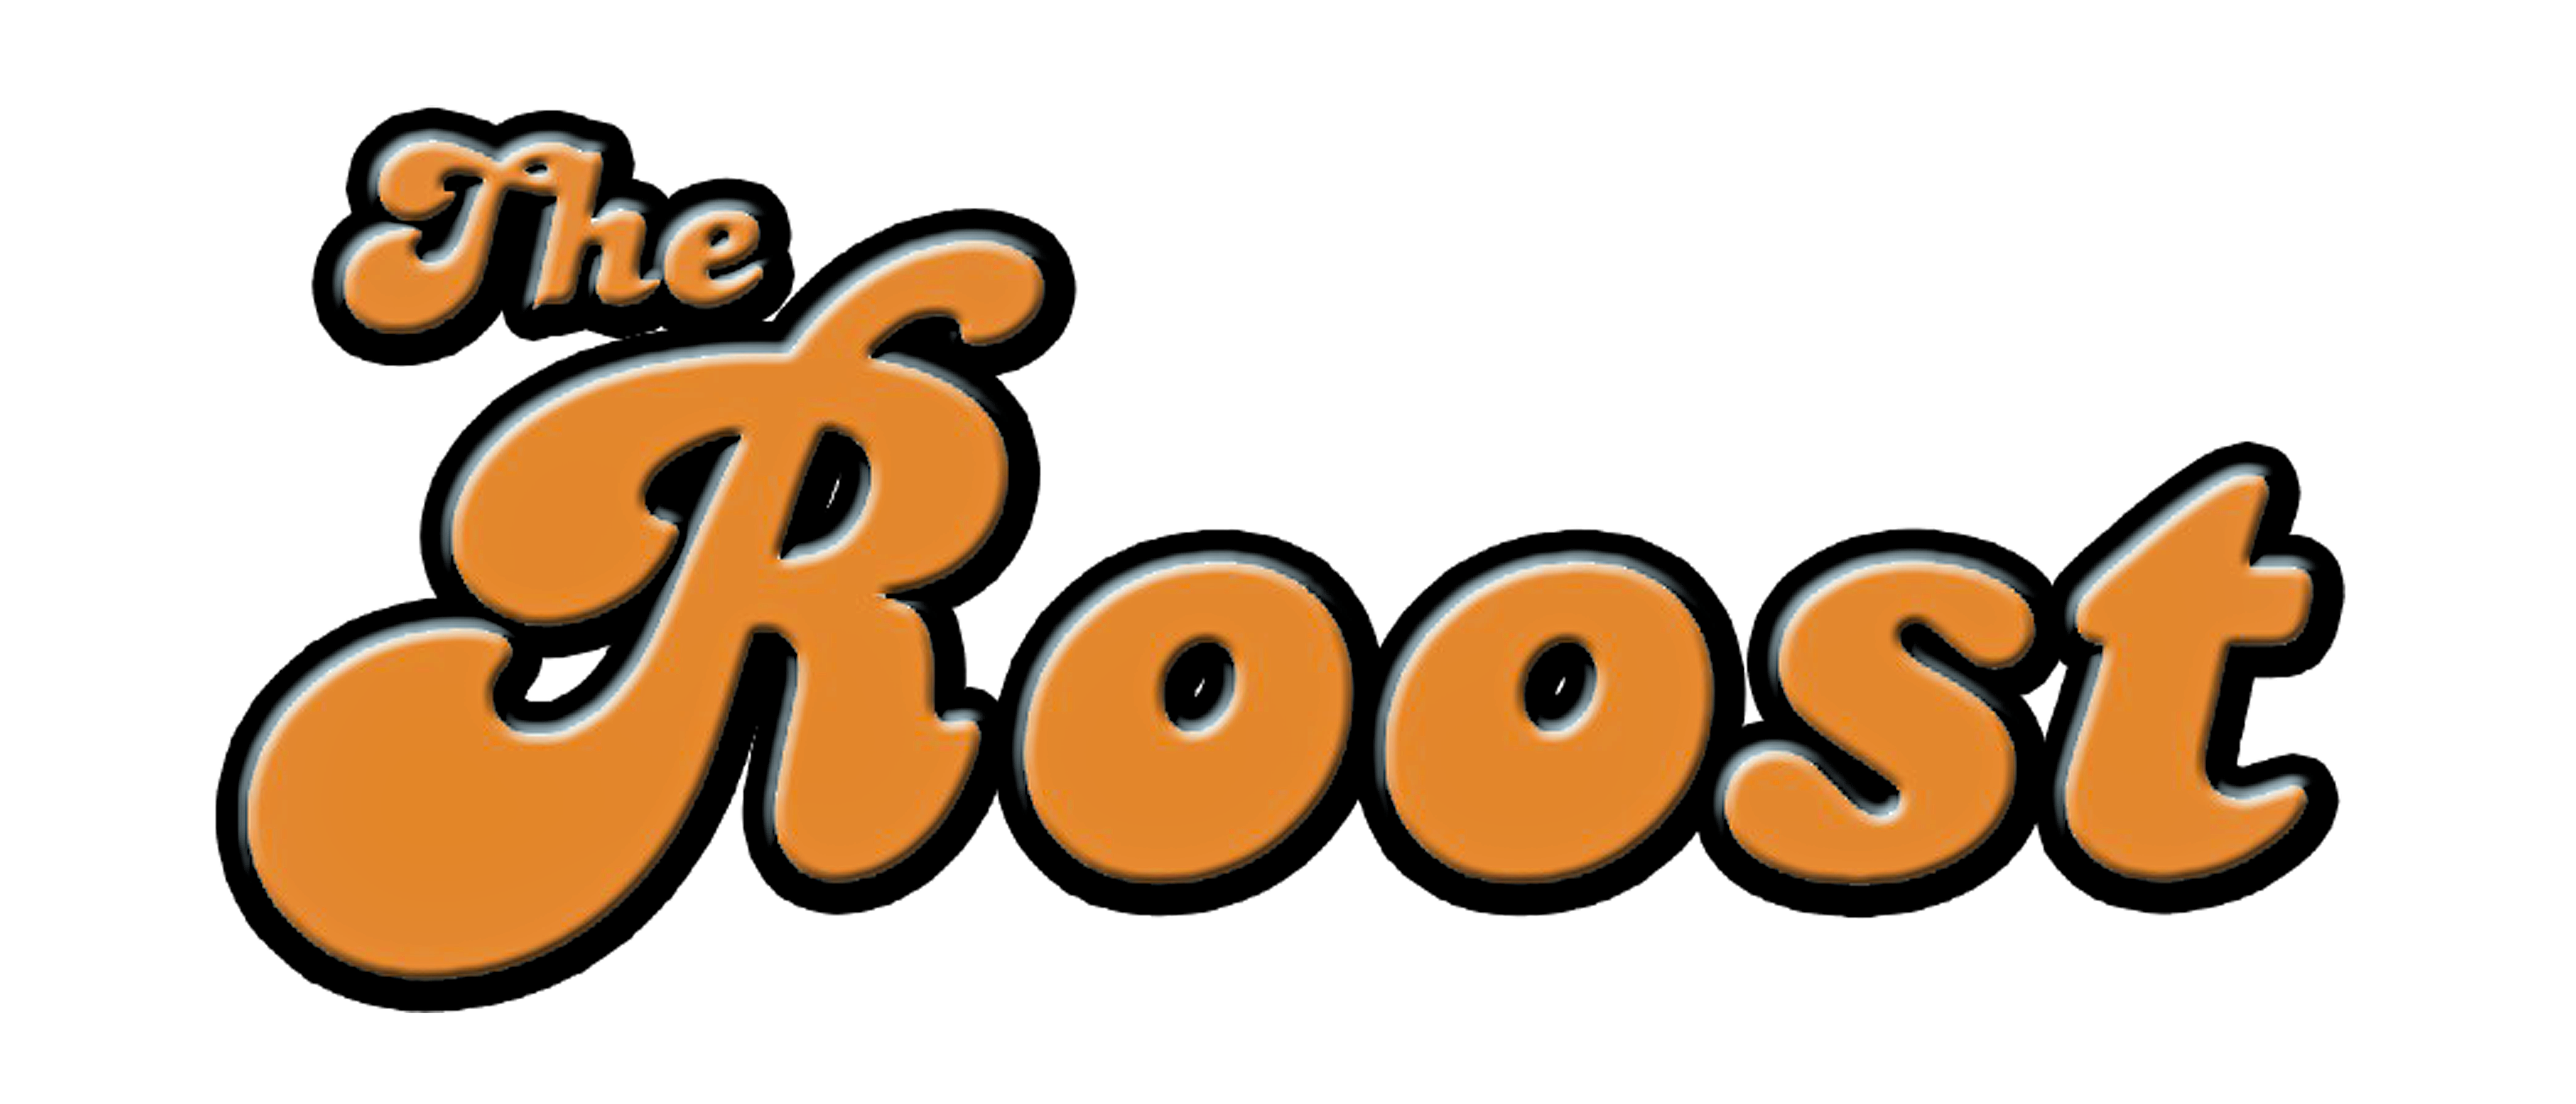 The Roost The Roost